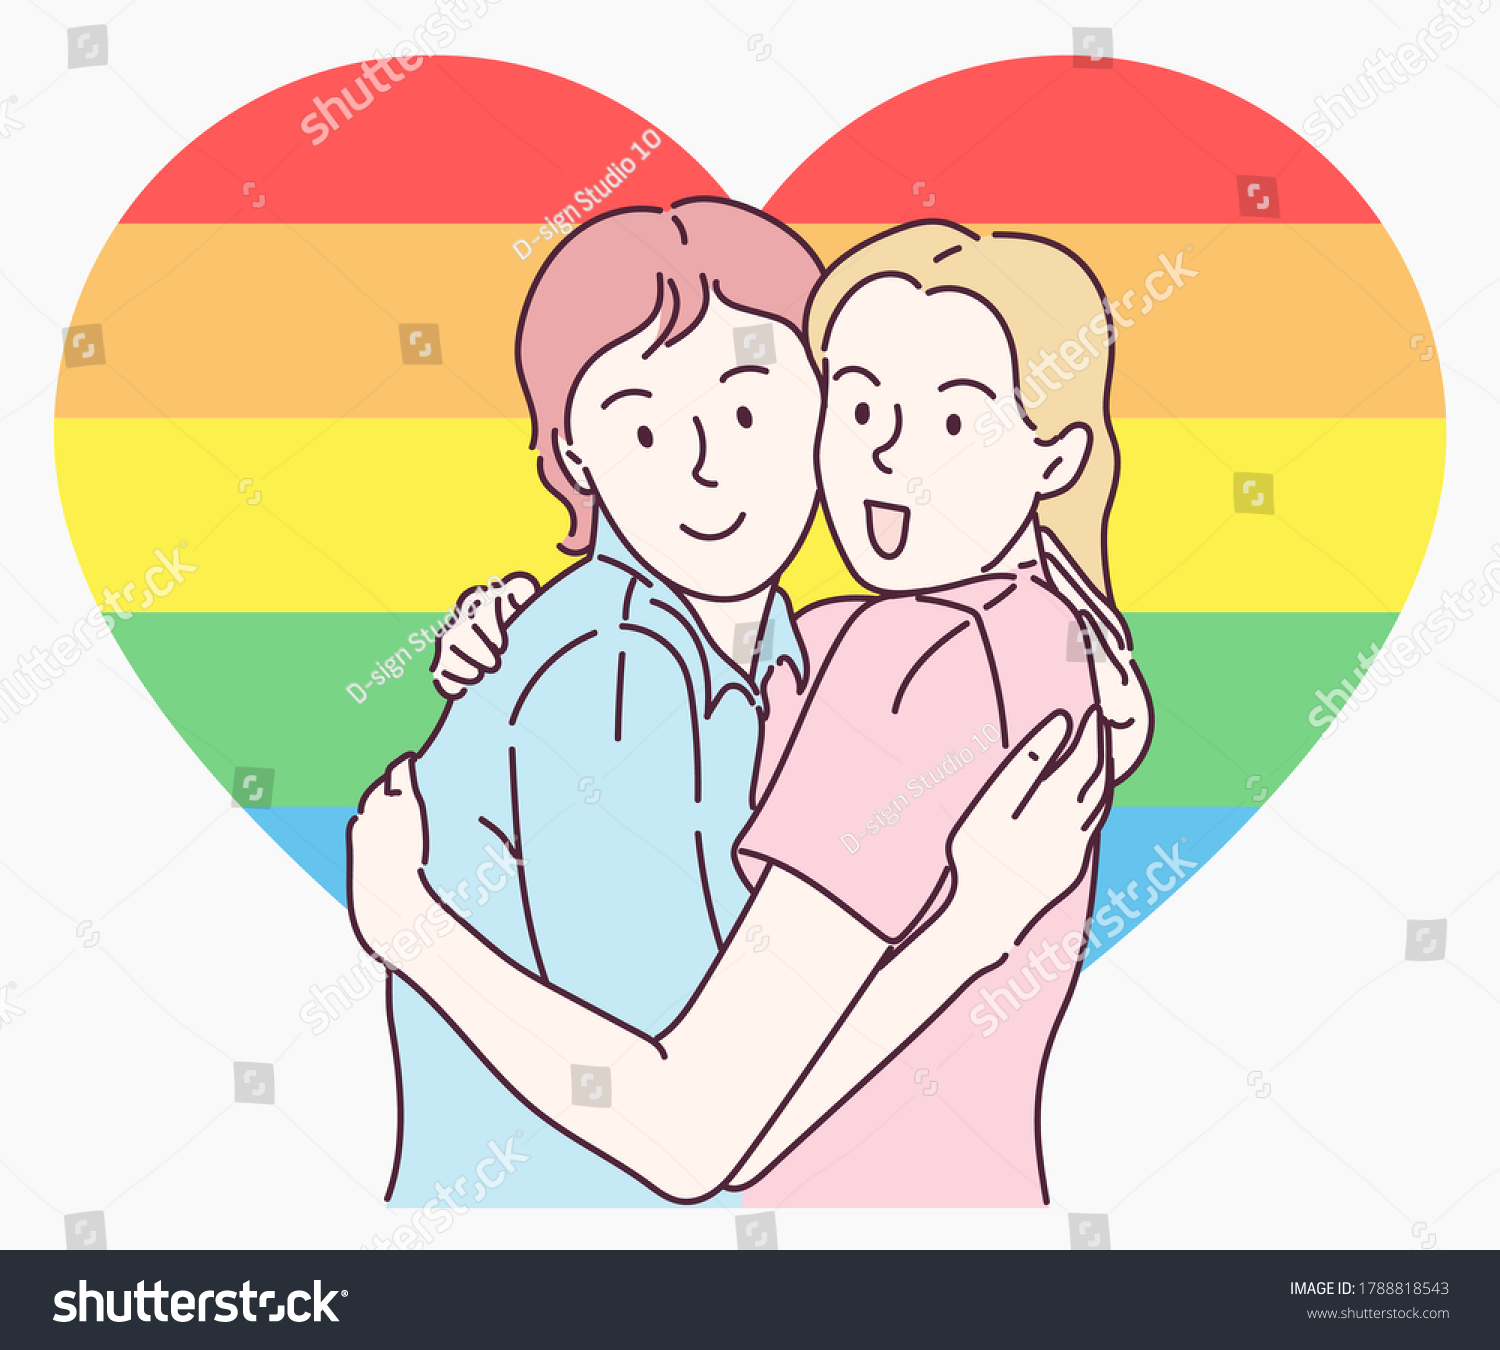 Two Young Women Embracing Each Other Stock Vector Royalty Free 1788818543 Shutterstock 